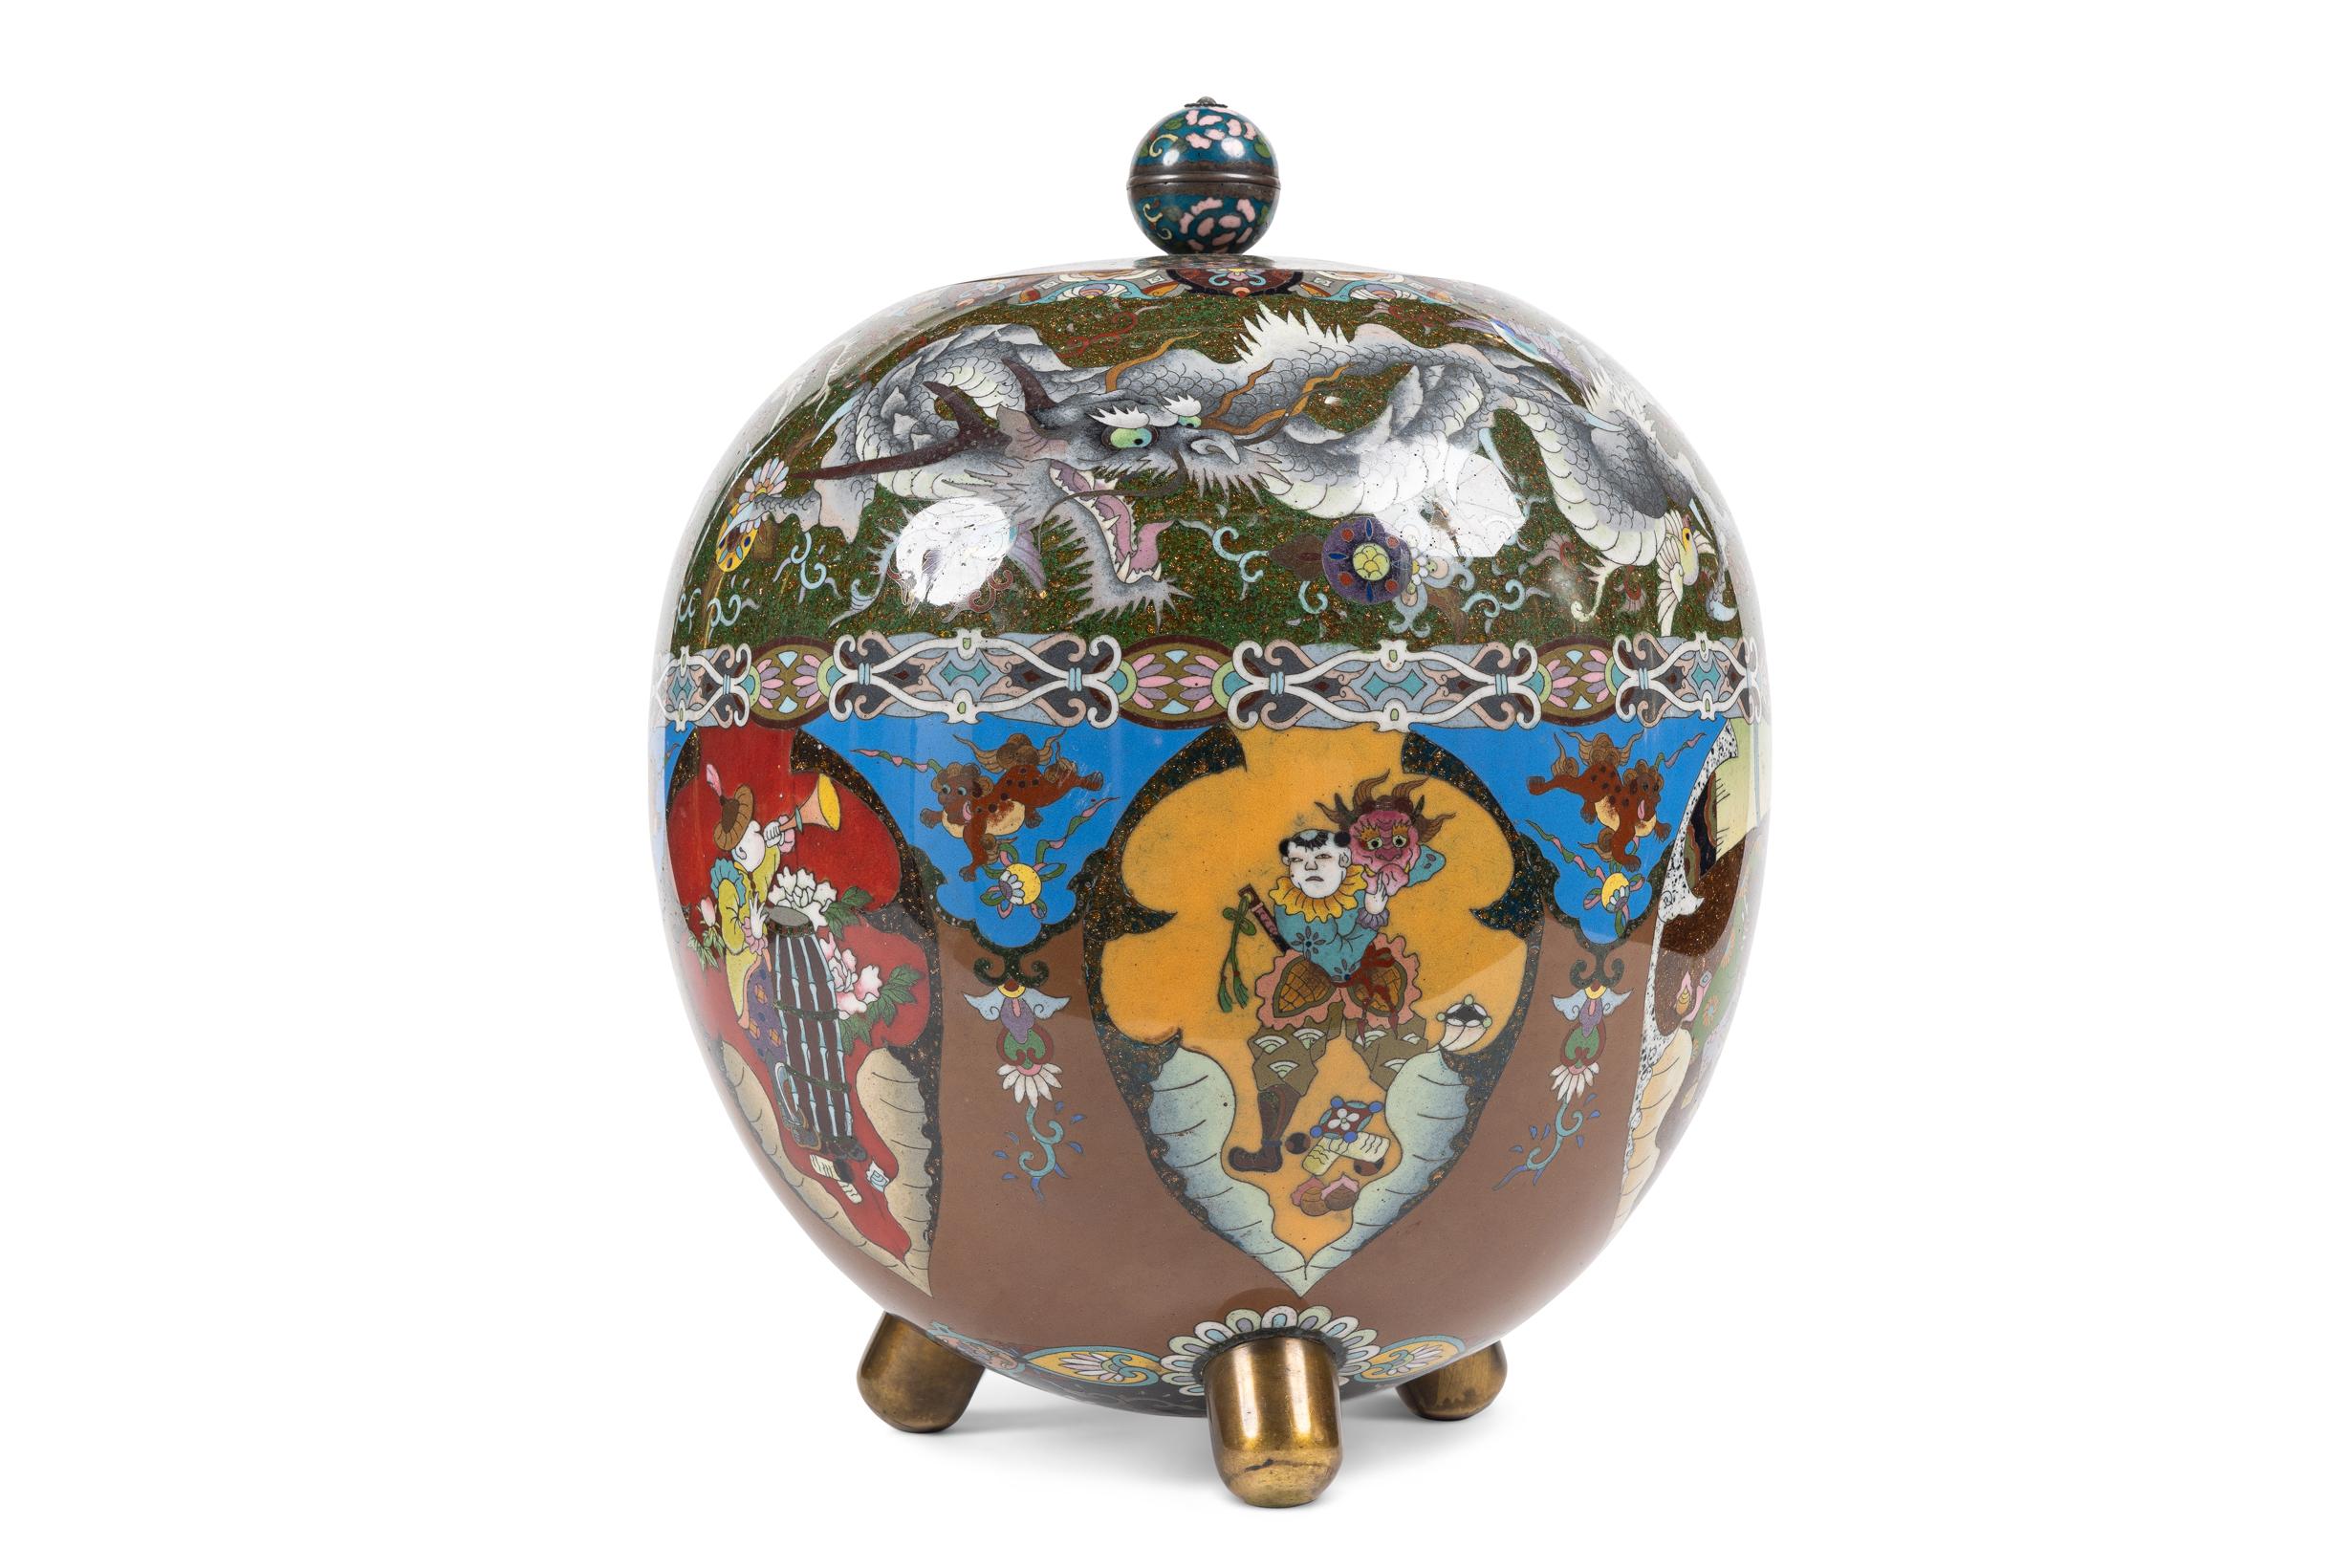  A Majestic and Large Japanese Meiji Cloisonné Enamel Covered Jar with Dragons, Mythological Creatures, and Theater Characters.

Presenting a truly majestic and captivating piece, behold the large Japanese Meiji Cloisonné Covered Jar adorned with